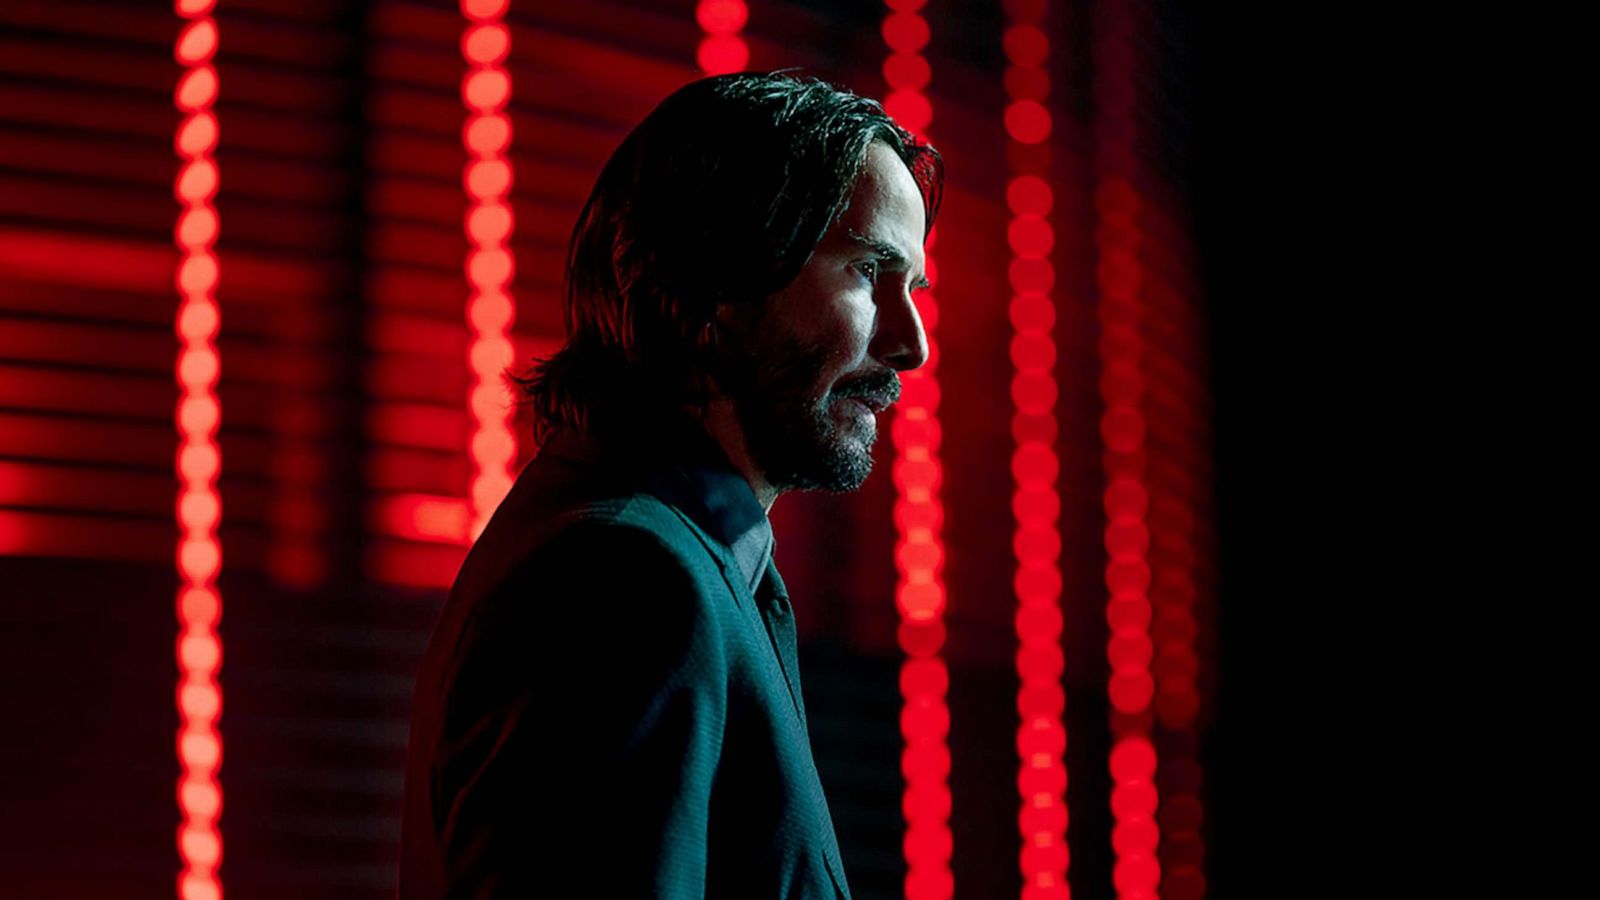 John Wick 5 Ordered, Will Be Shot Back-to-Back with John Wick 4